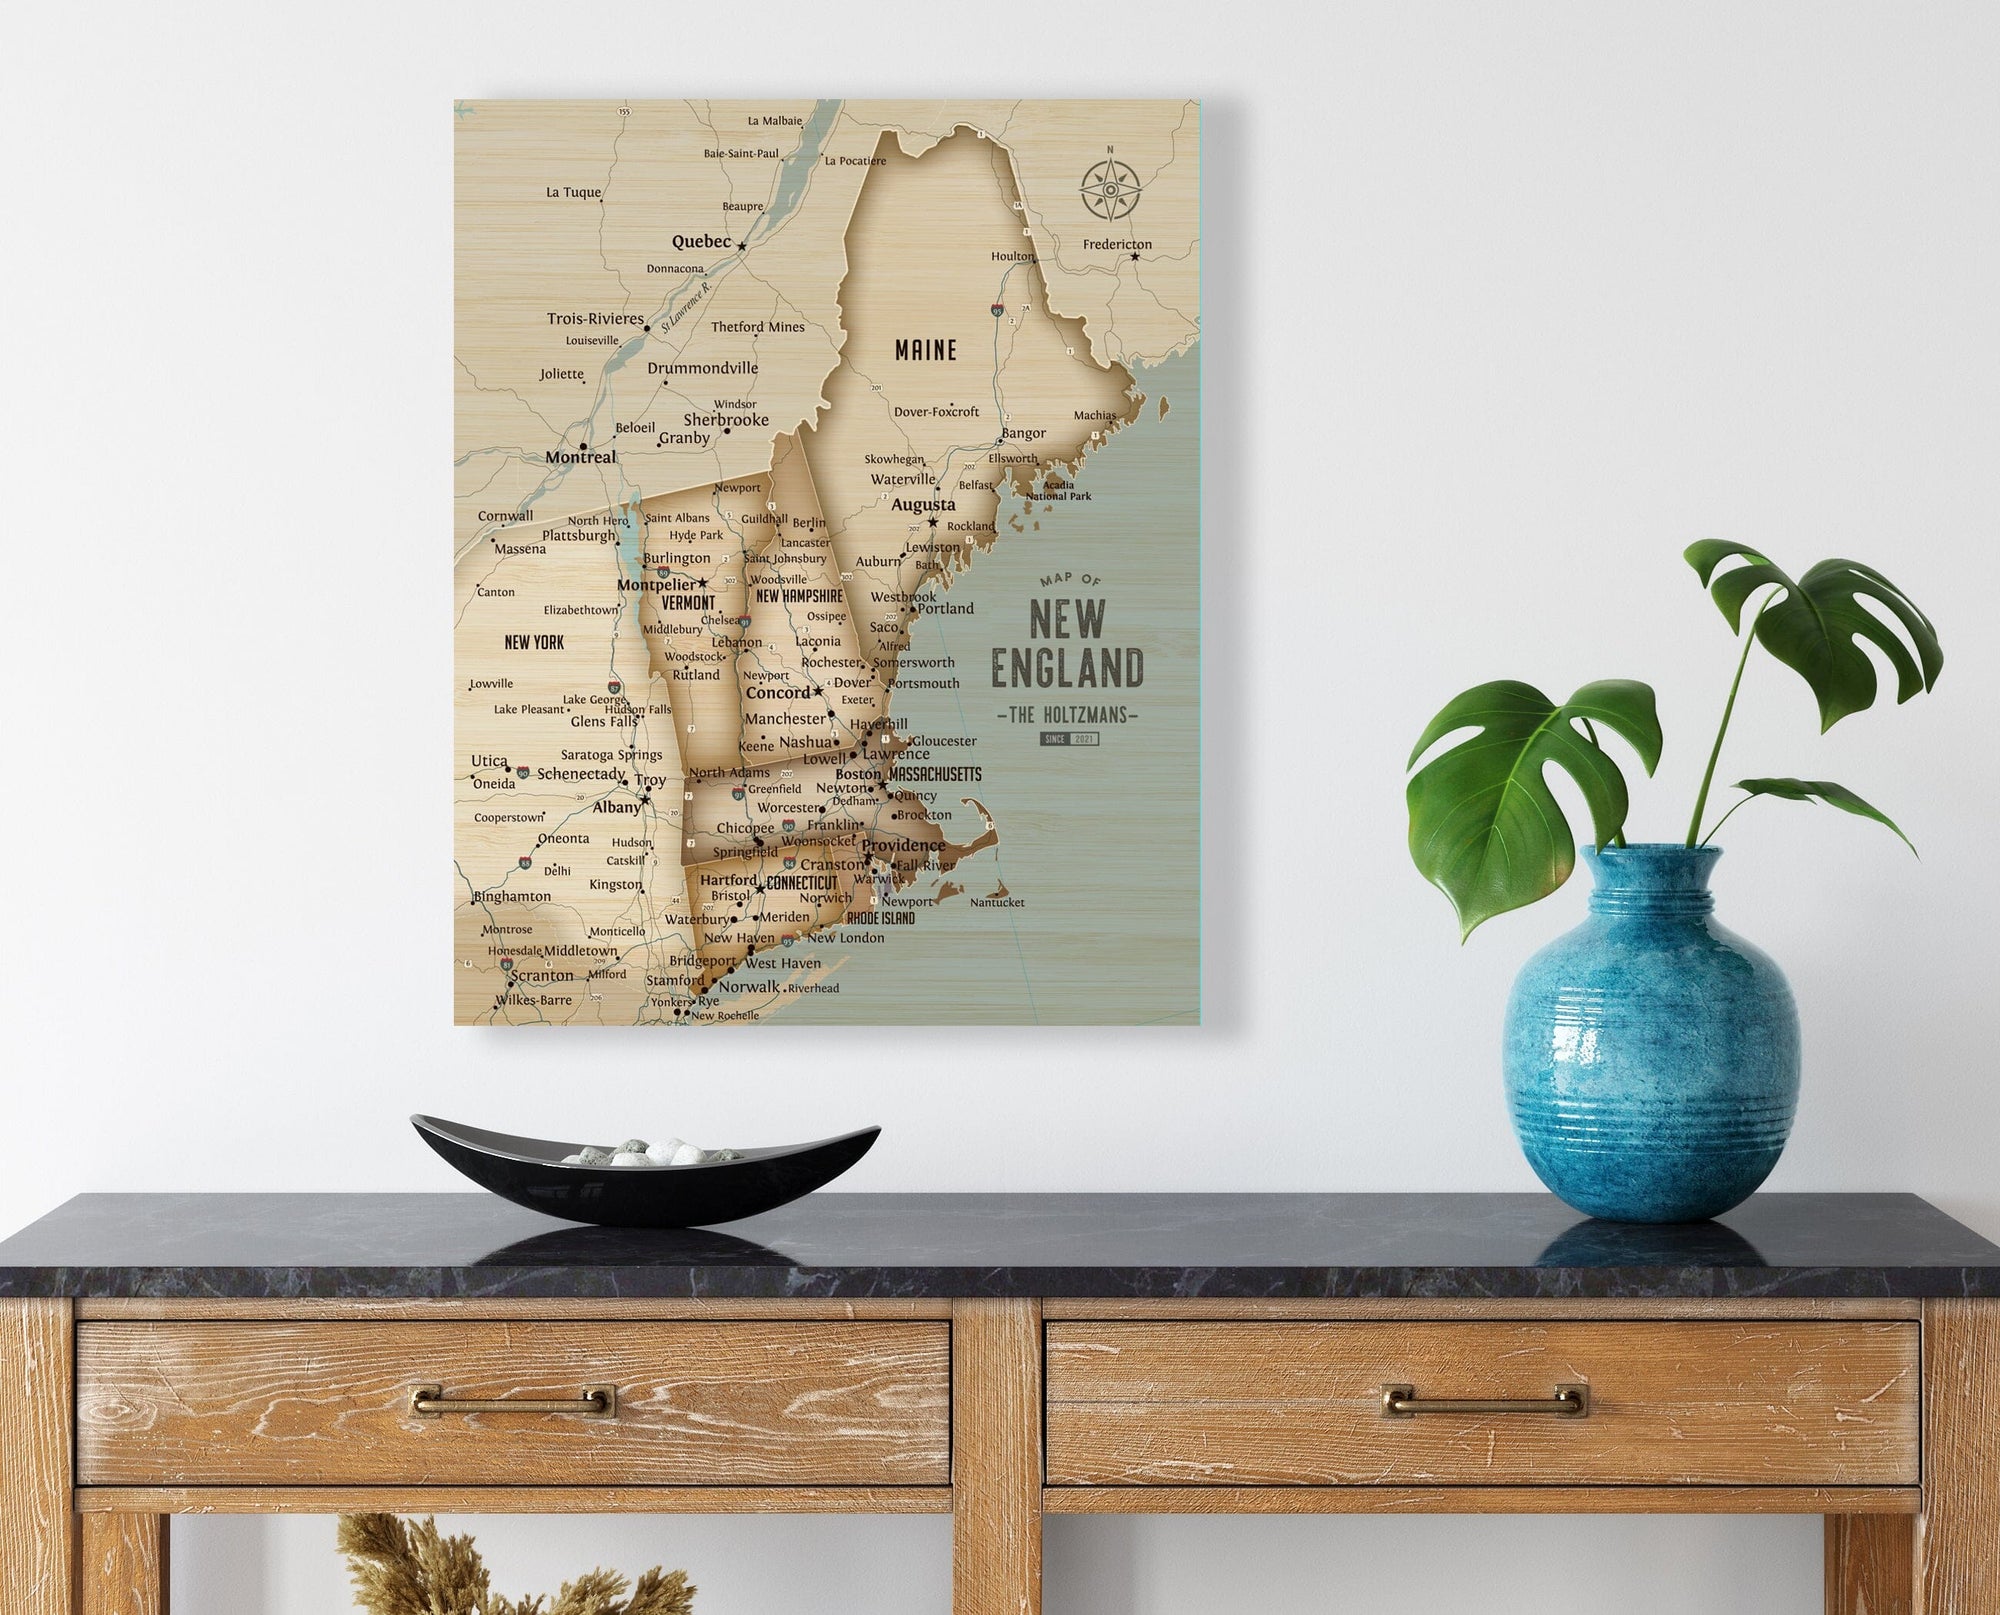 New England Canvas Pin Map, Push Pin Style, Vintage Style, Personalized Map World Vibe Studio 